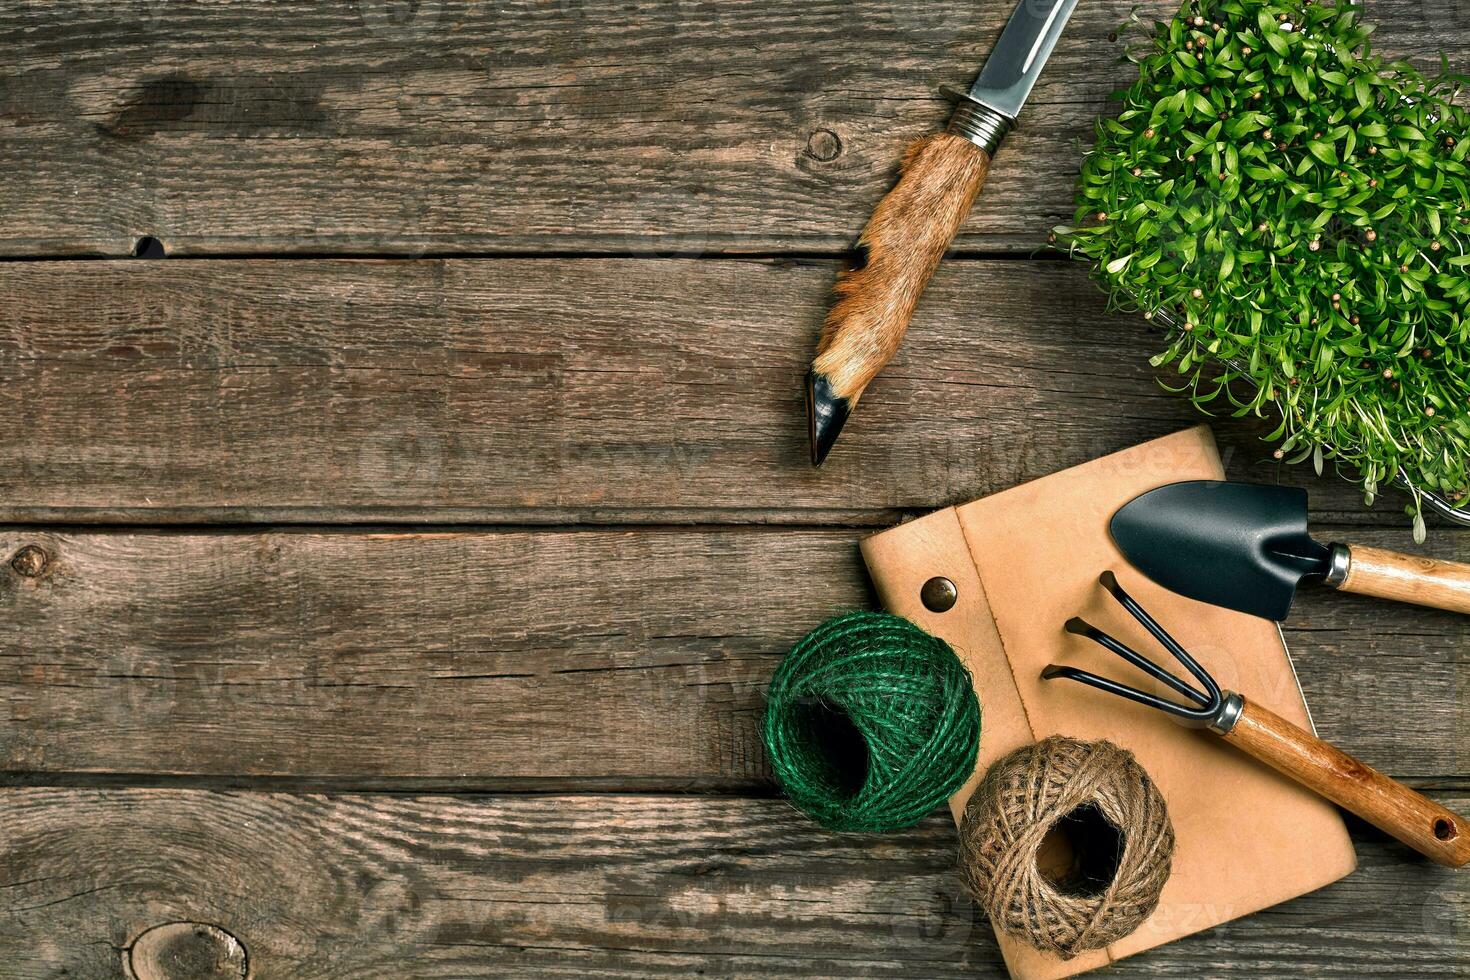 Gardening tools and greenery on wooden table. Spring in the garden photo